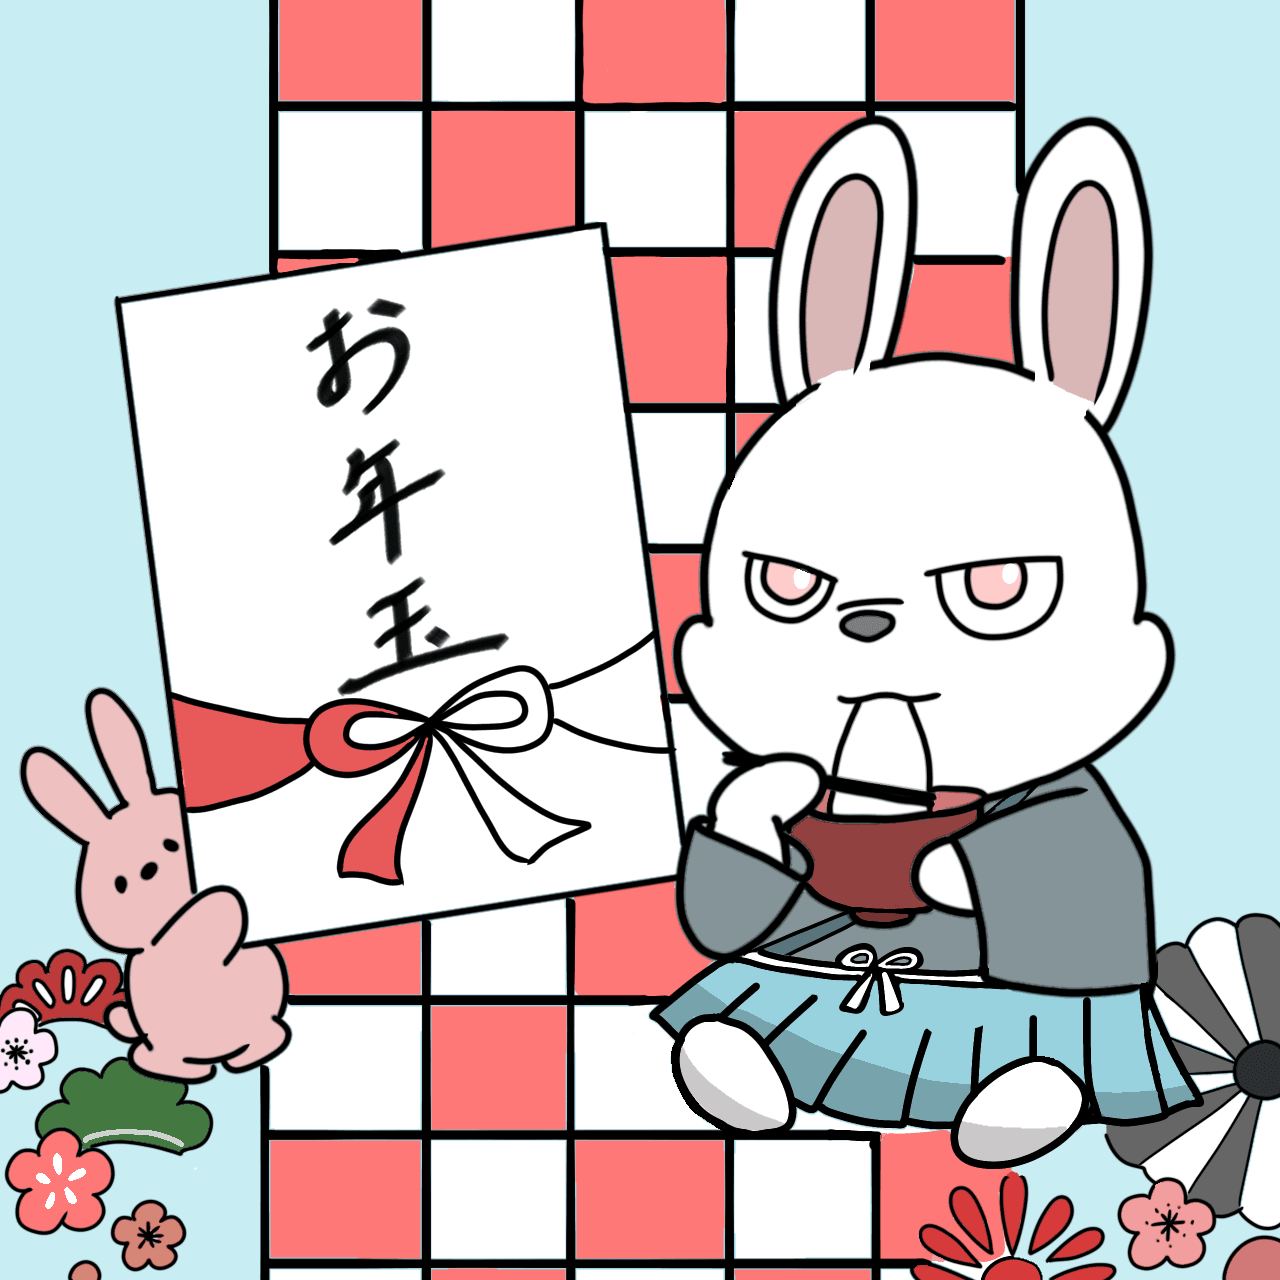 TMABaby rabbit New Years card